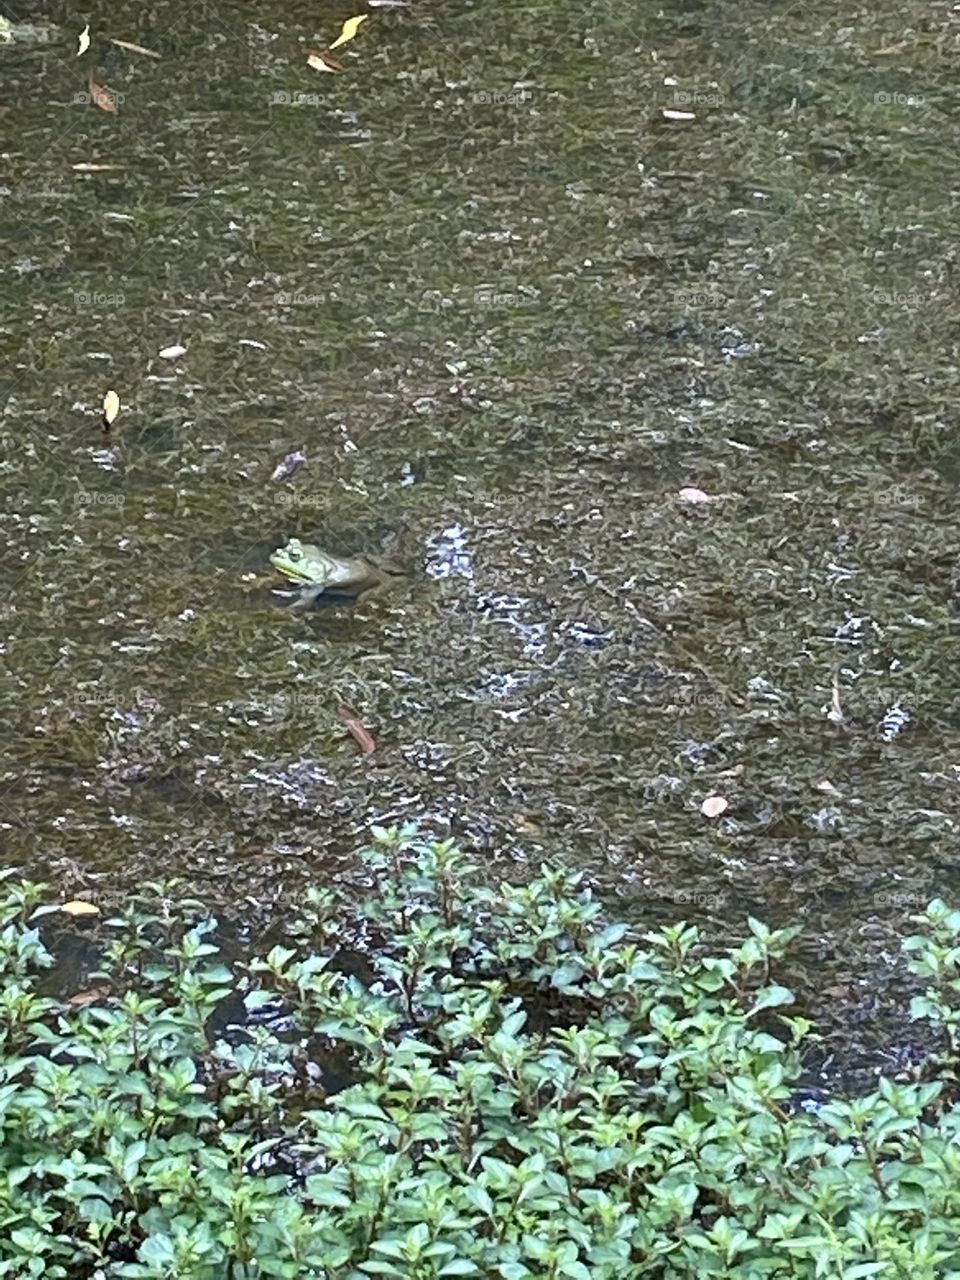 Frog poking his or her head out of a pond in a local park, Deep Cut Gardens in NJ. A beautiful tranquil place to walk. 